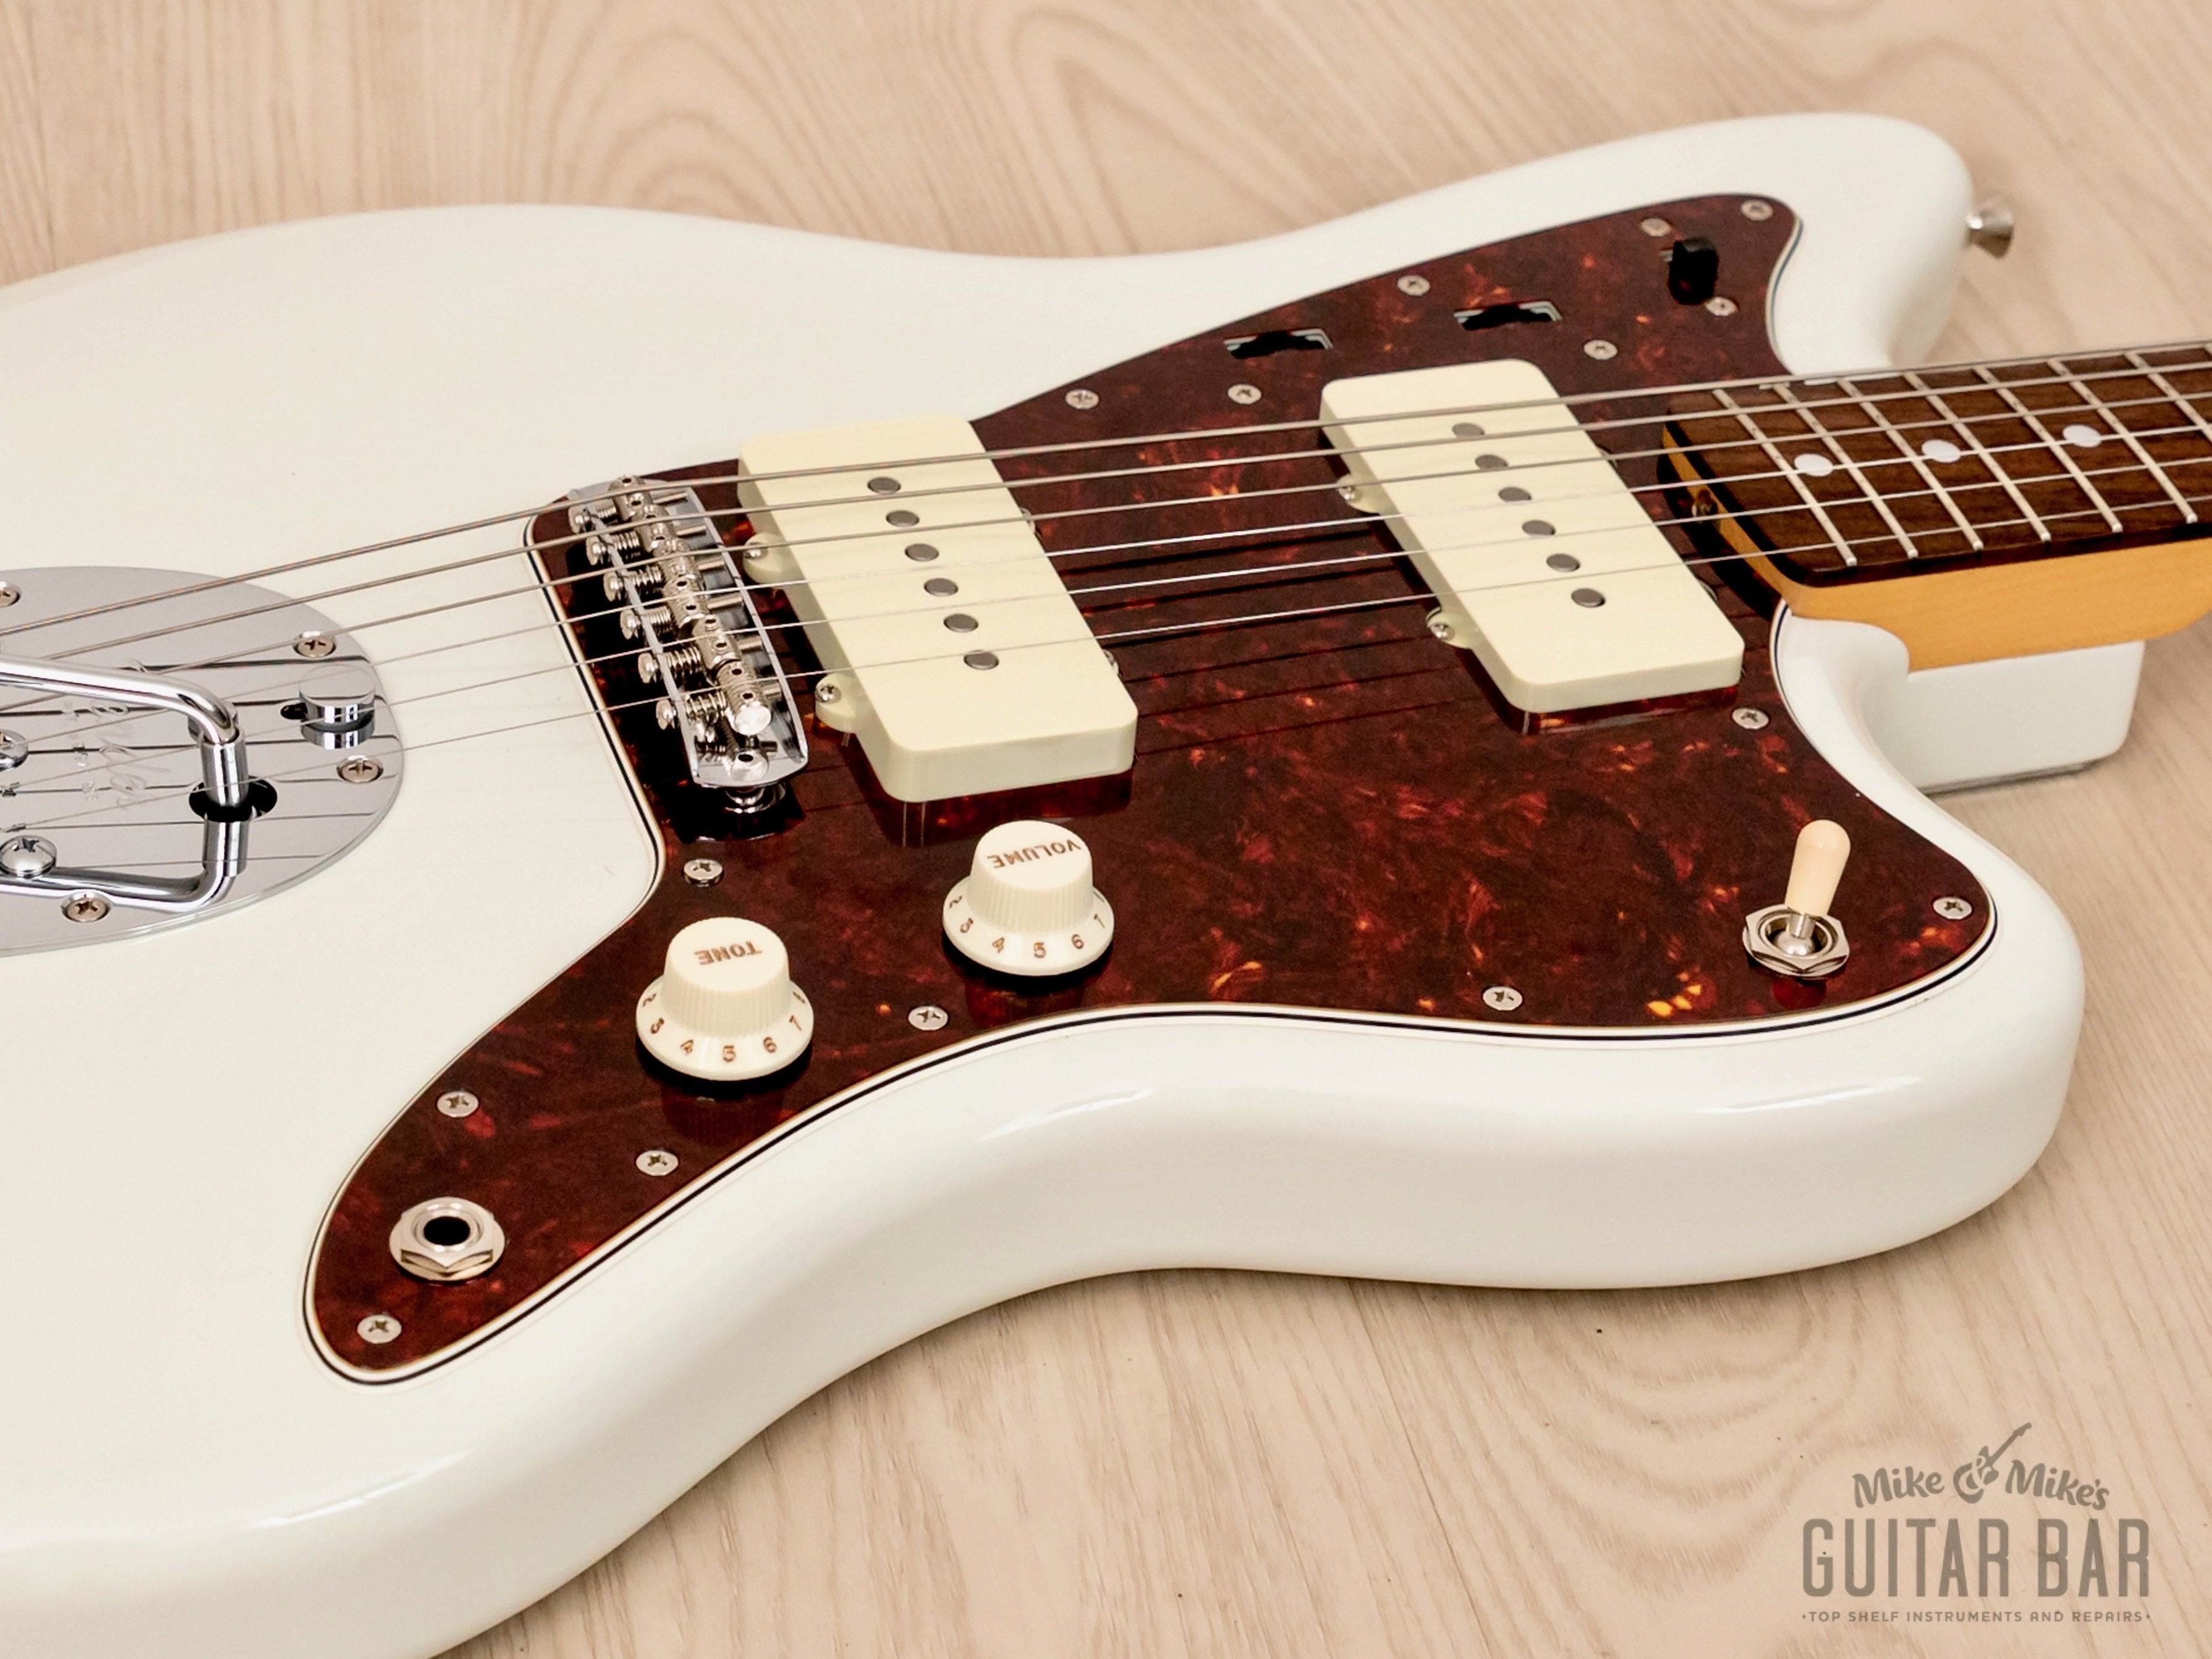 2023 Fender Traditional II 60s Jazzmaster Offset Guitar Olympic White w/ Hangtags, Japan MIJ